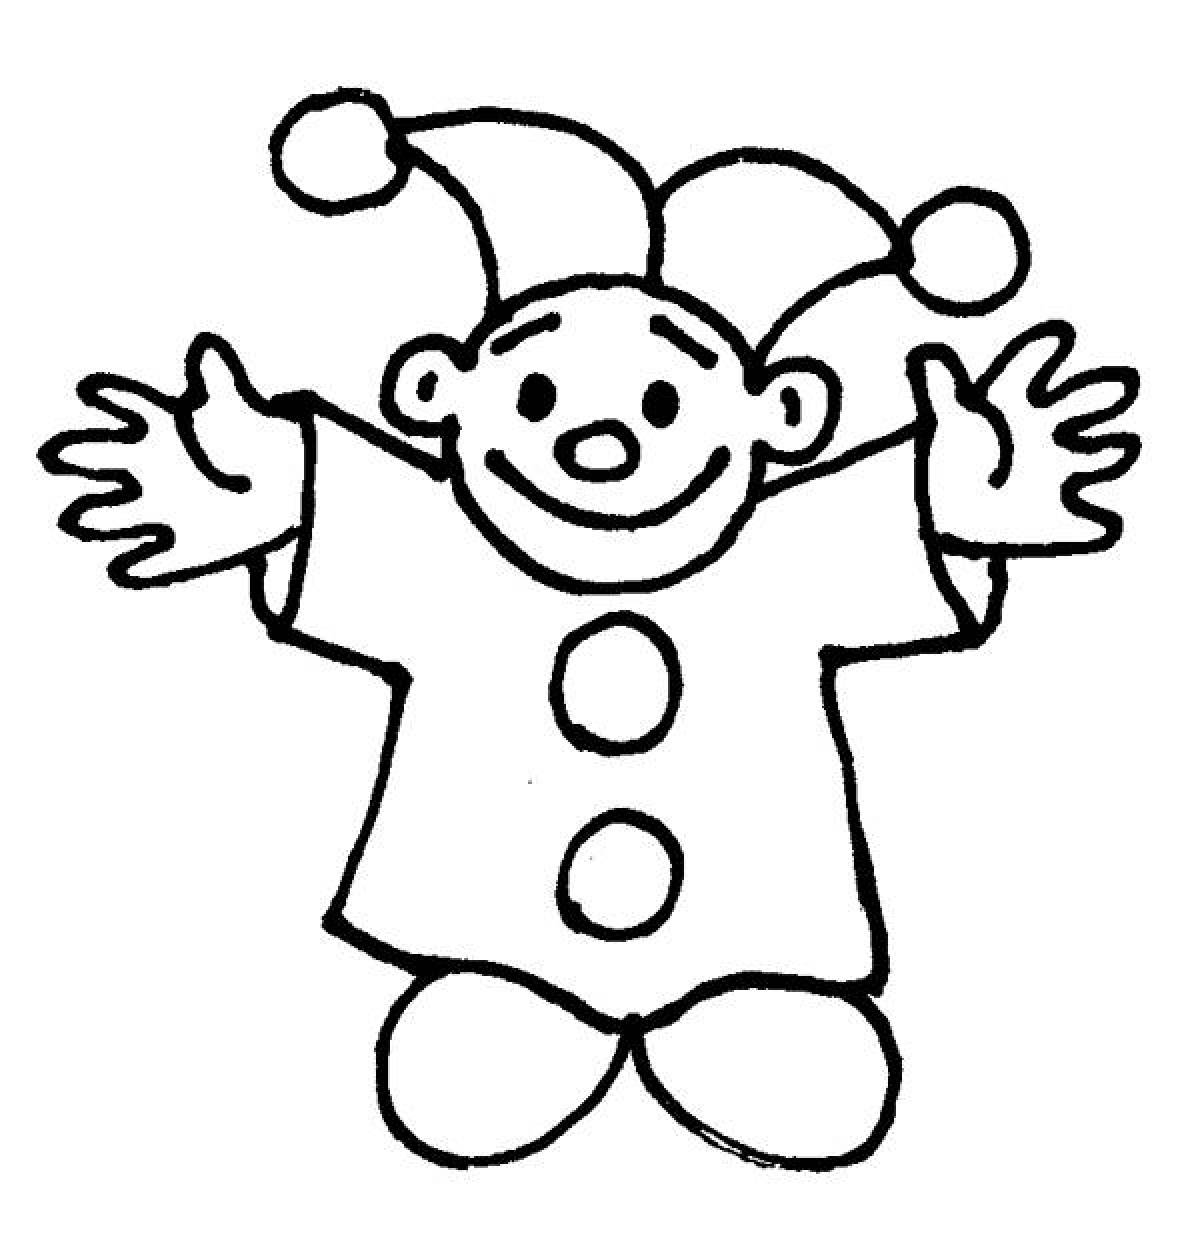 Parsley coloring page